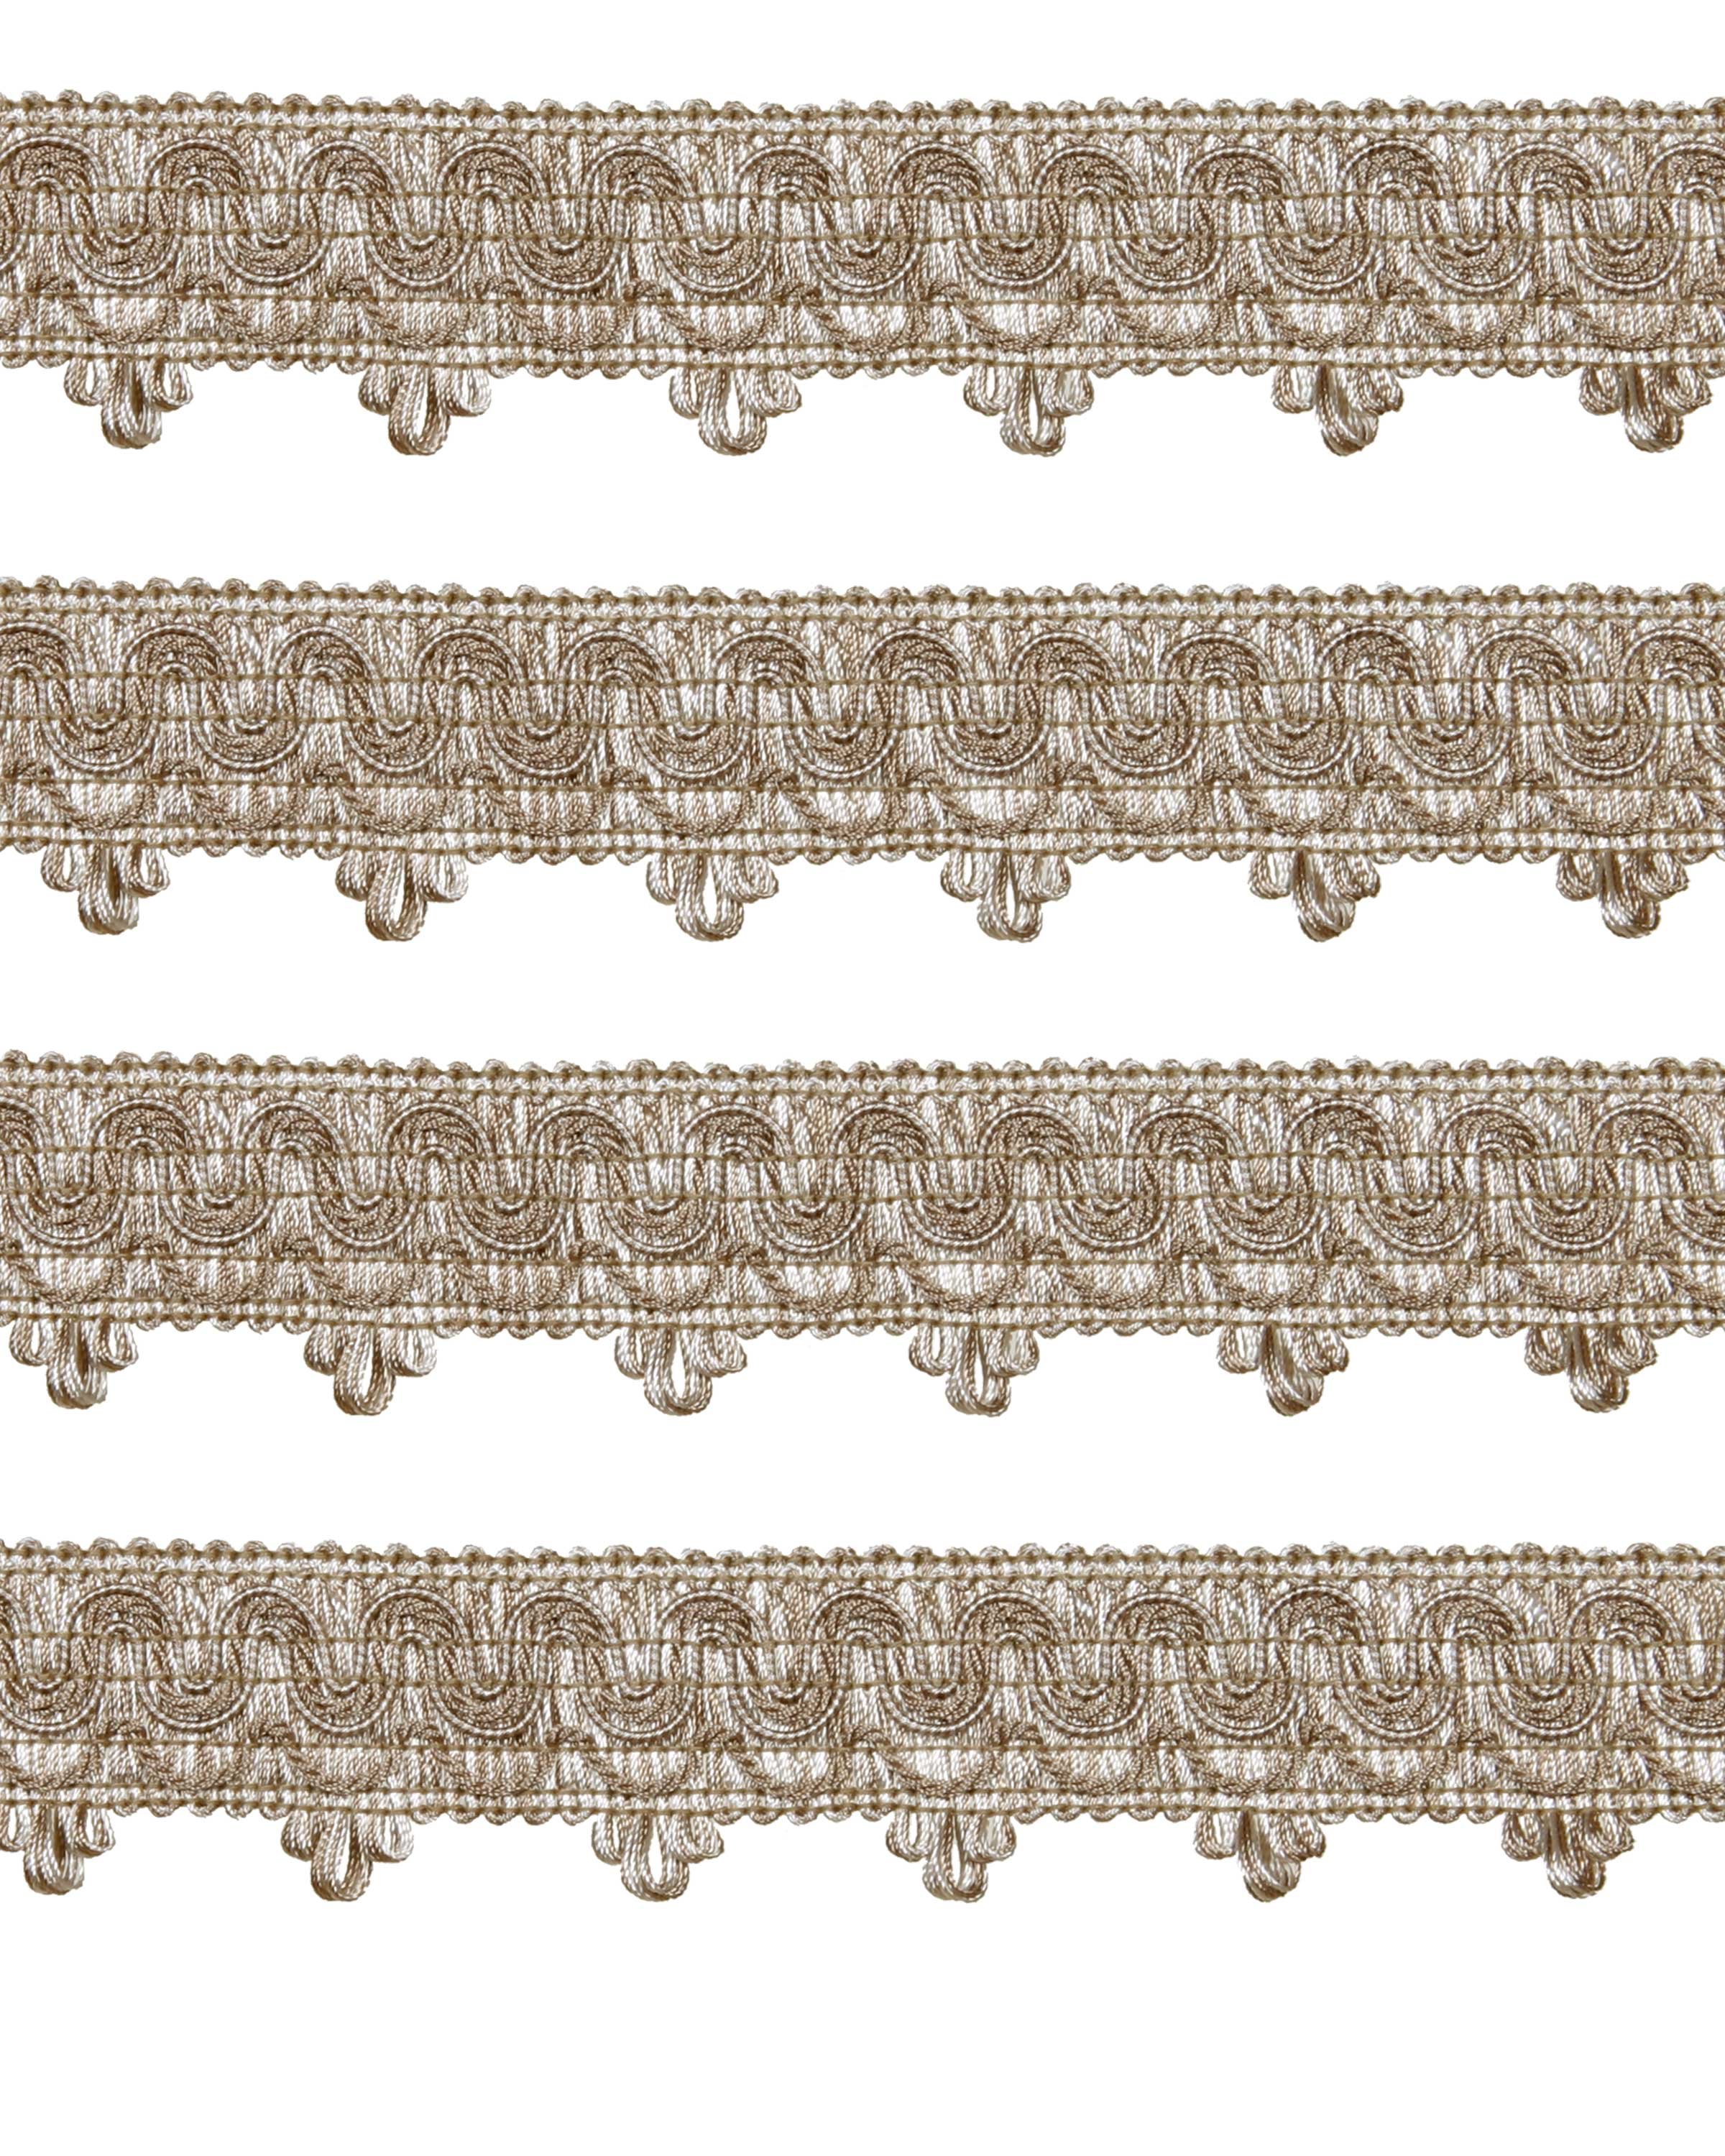 Ornate Scalloped Braid - Beige 45mm Price is for 5 metres